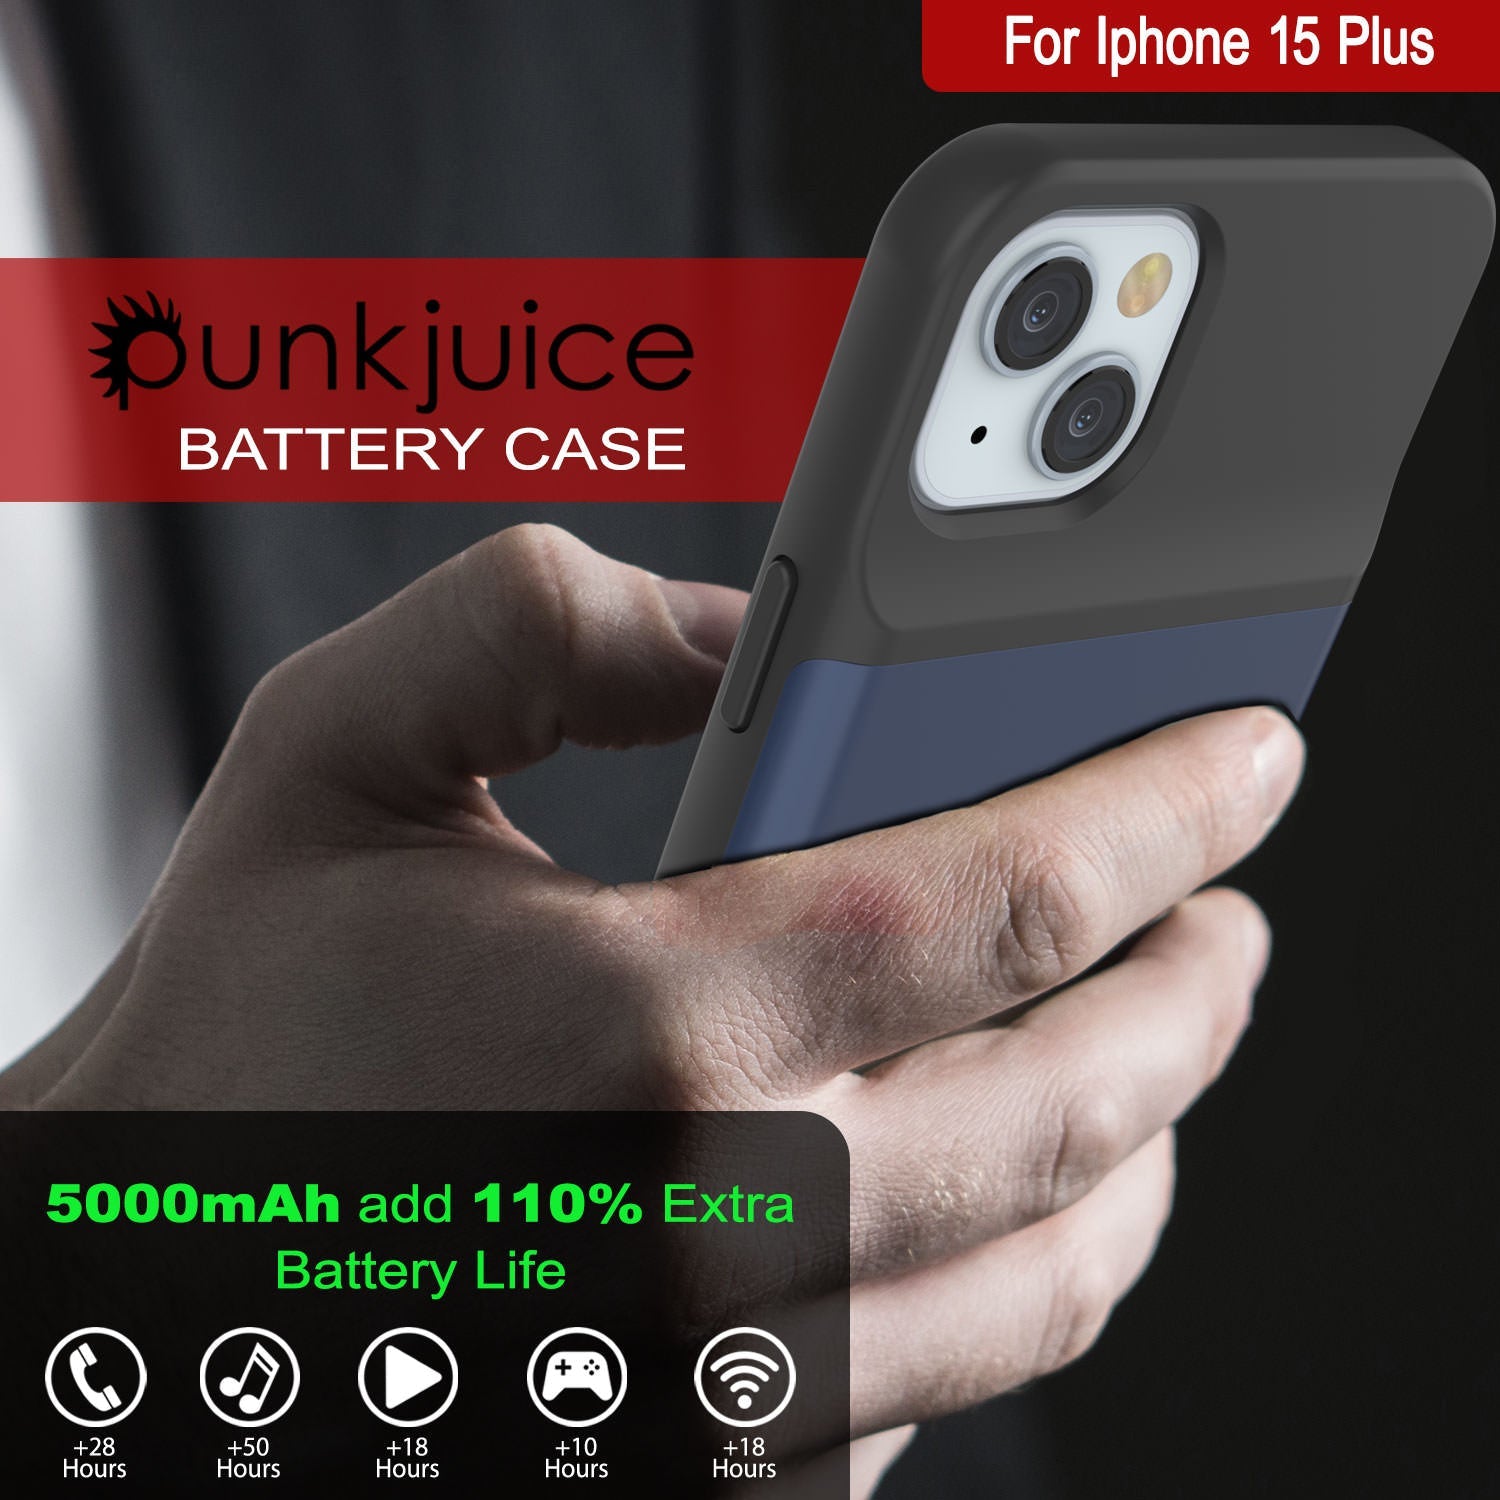 iPhone 15 Plus Battery Case, PunkJuice 5000mAH Fast Charging Power Bank W/ Screen Protector | [Navy Blue]